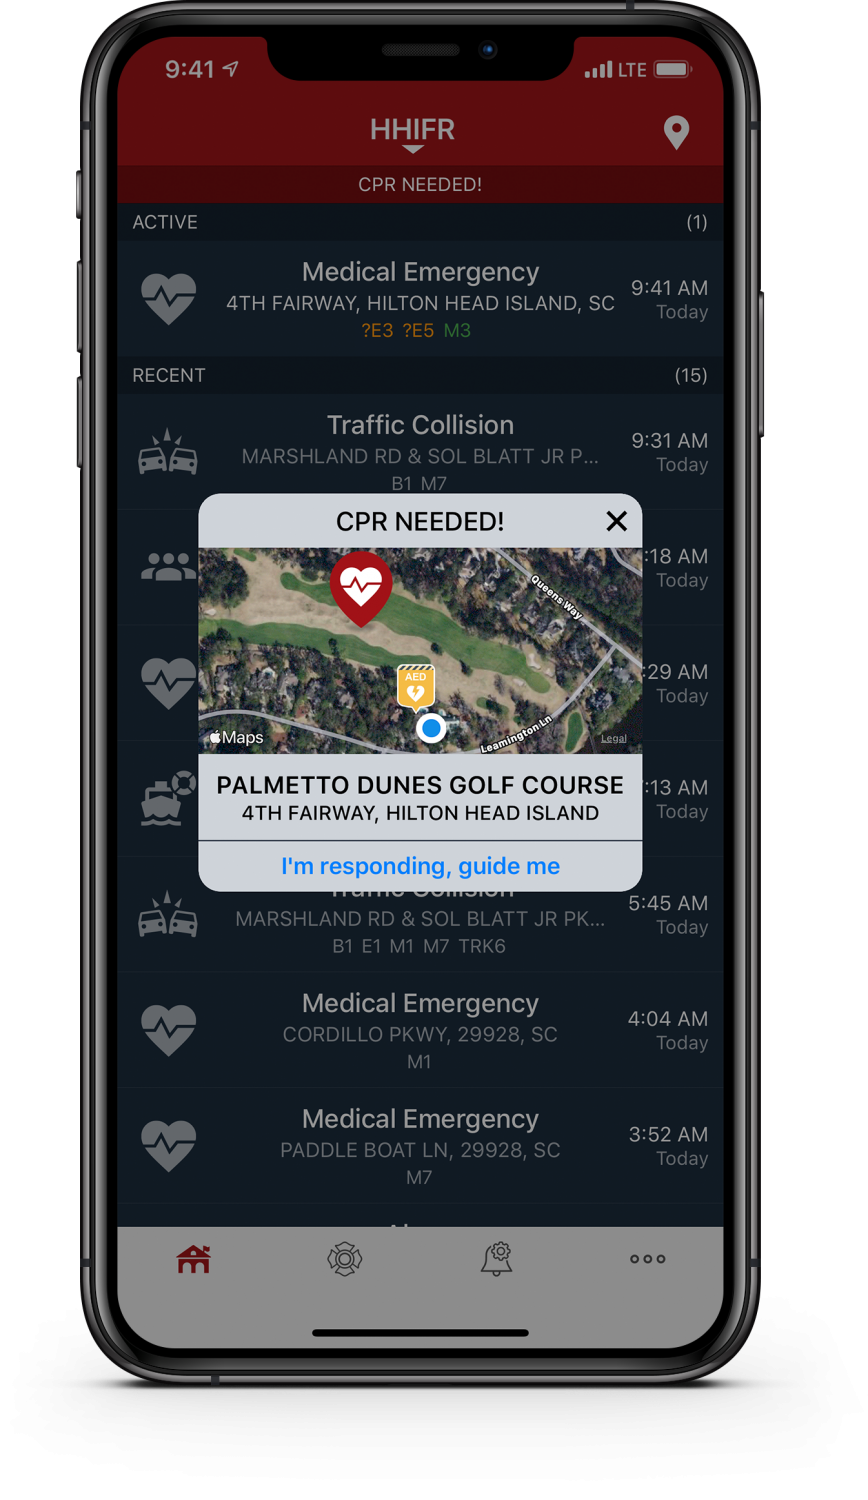 PulsePoint CPR needed notification with "I'm responding" pop-up